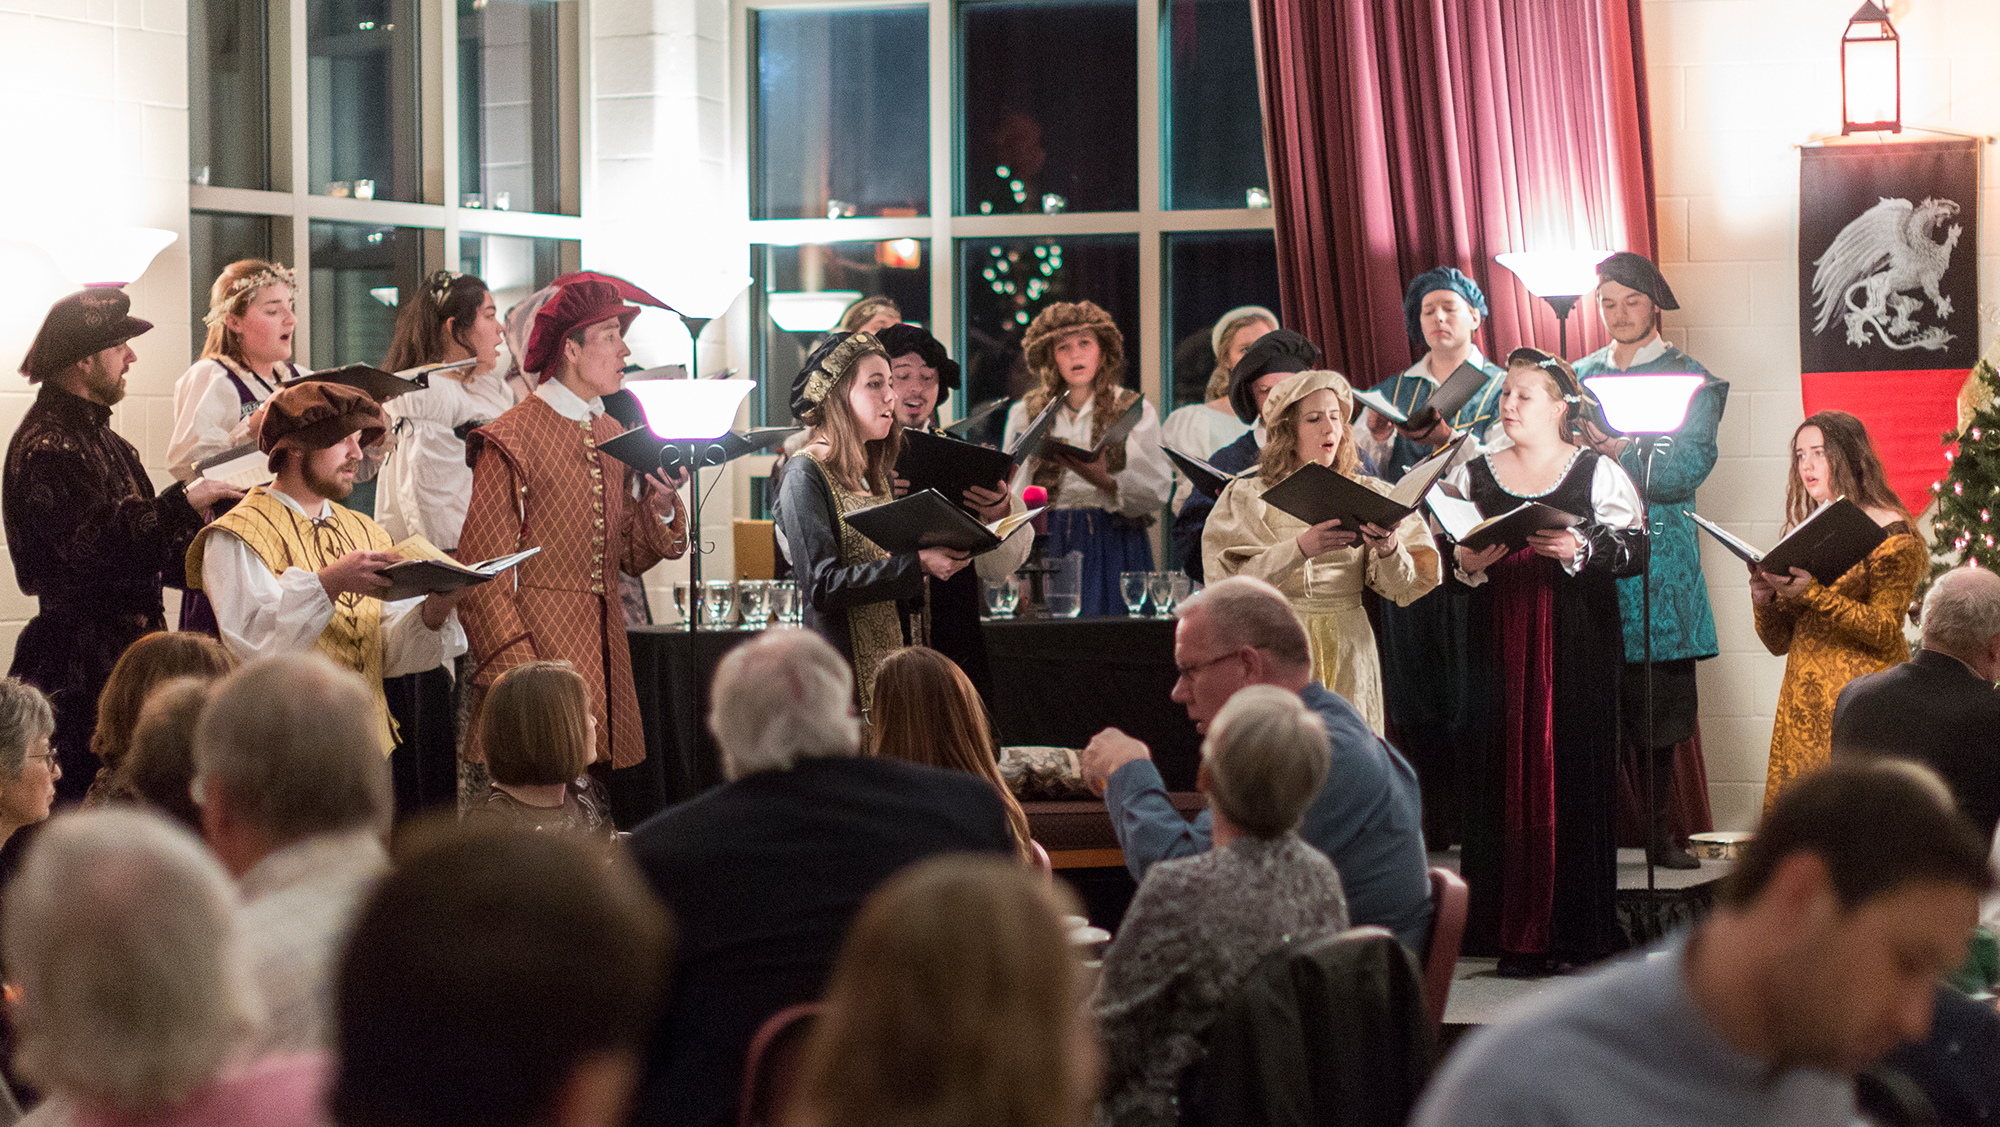 BHSU Music Department will perform the Madrigal Dinner Dec. 1-3 at 6:30 p.m.